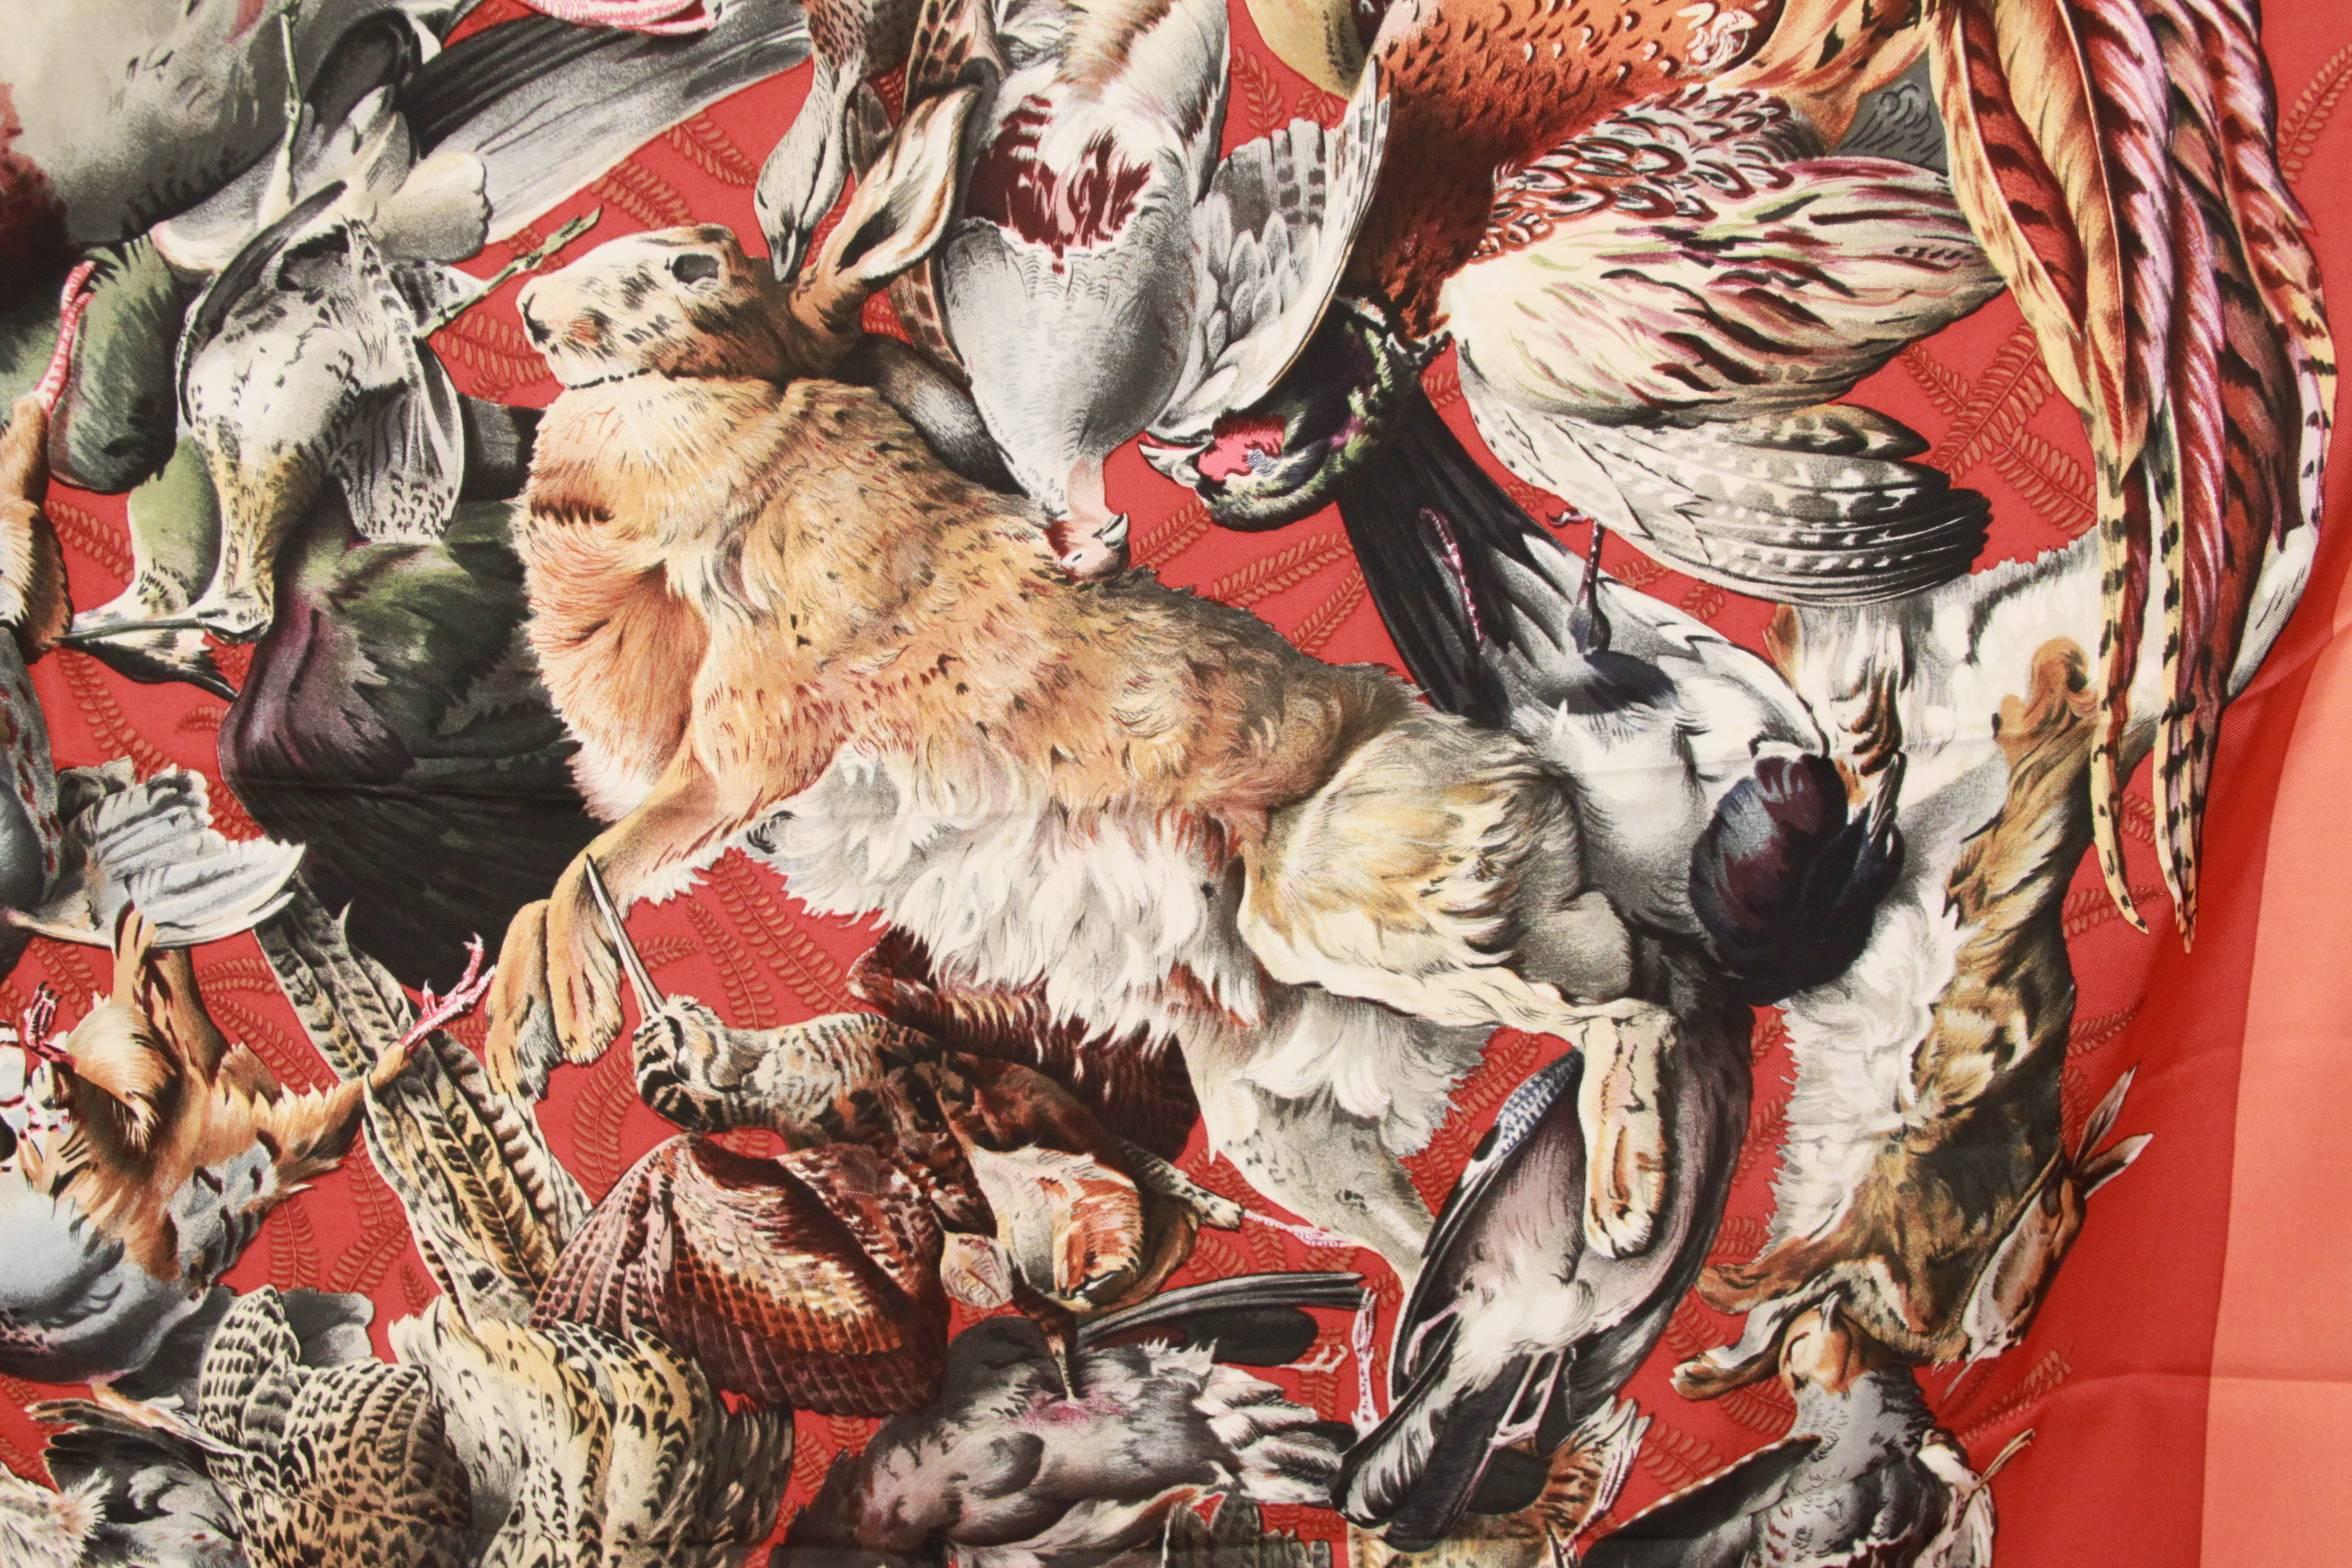 HERMES vintage gorgeous "GIBIERS" print silk scarf. Designed by HENRI DE LINARES and first issued in 1966. Opulent design of pheasants, rabbit, and hunting game on red background and orange border. Hand rolled edges. Made in France

Logos